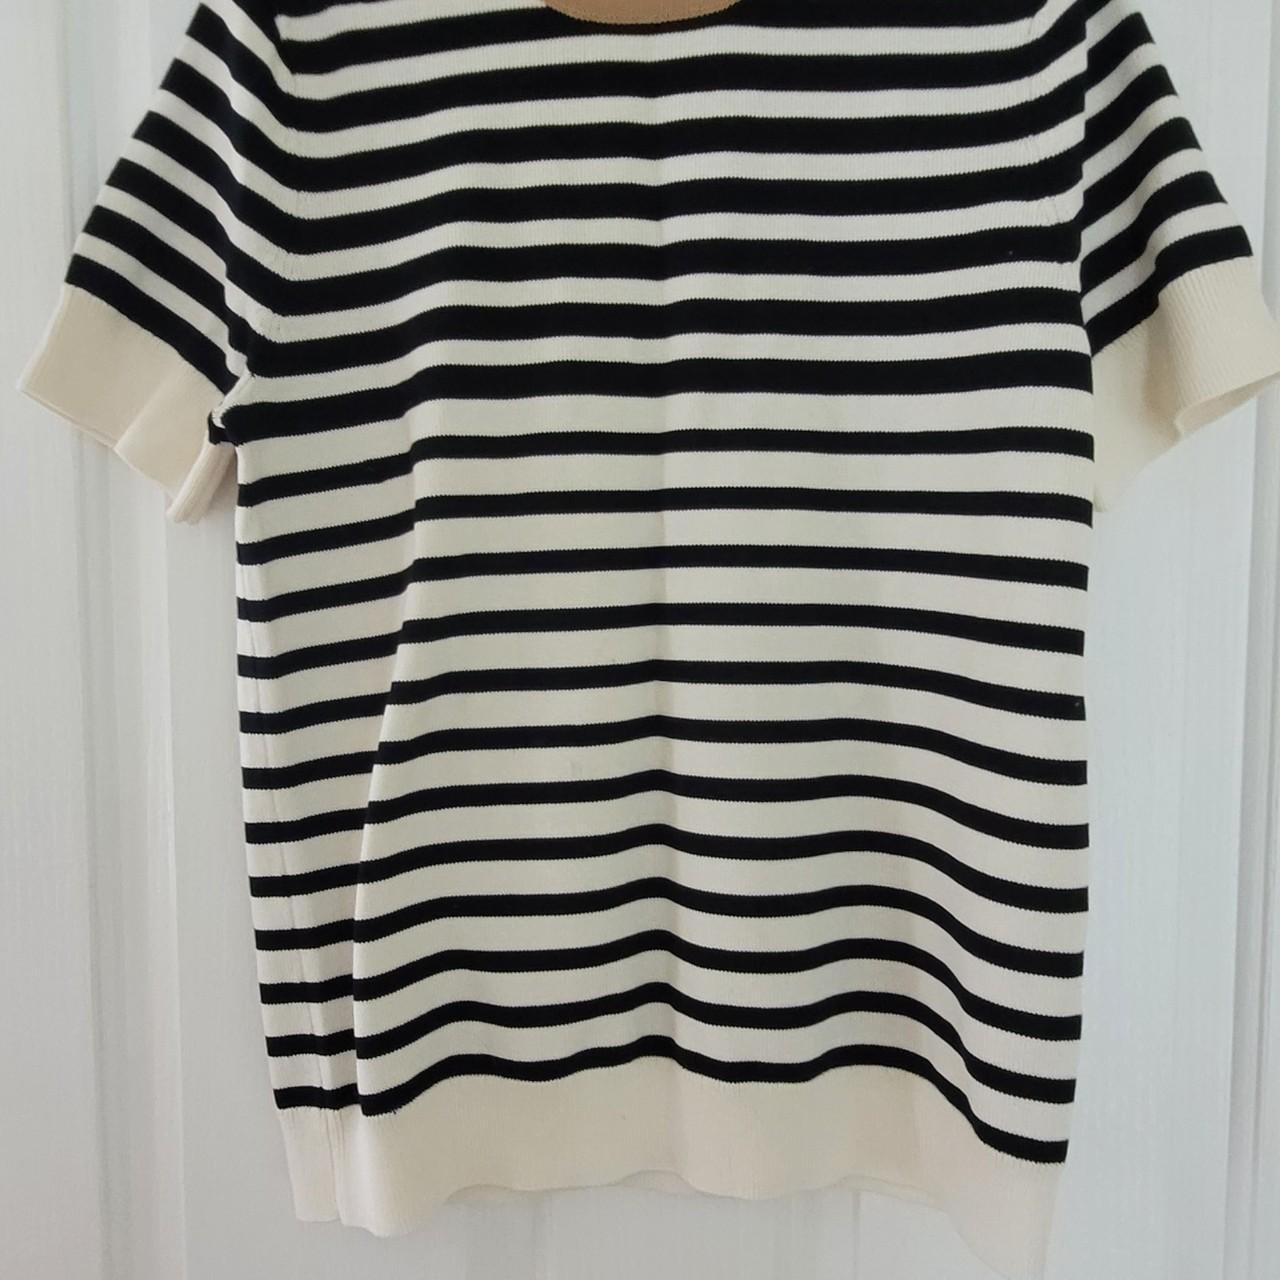 COS knitted striped tshirt Sz M NWOT RRP $65 It's... - Depop